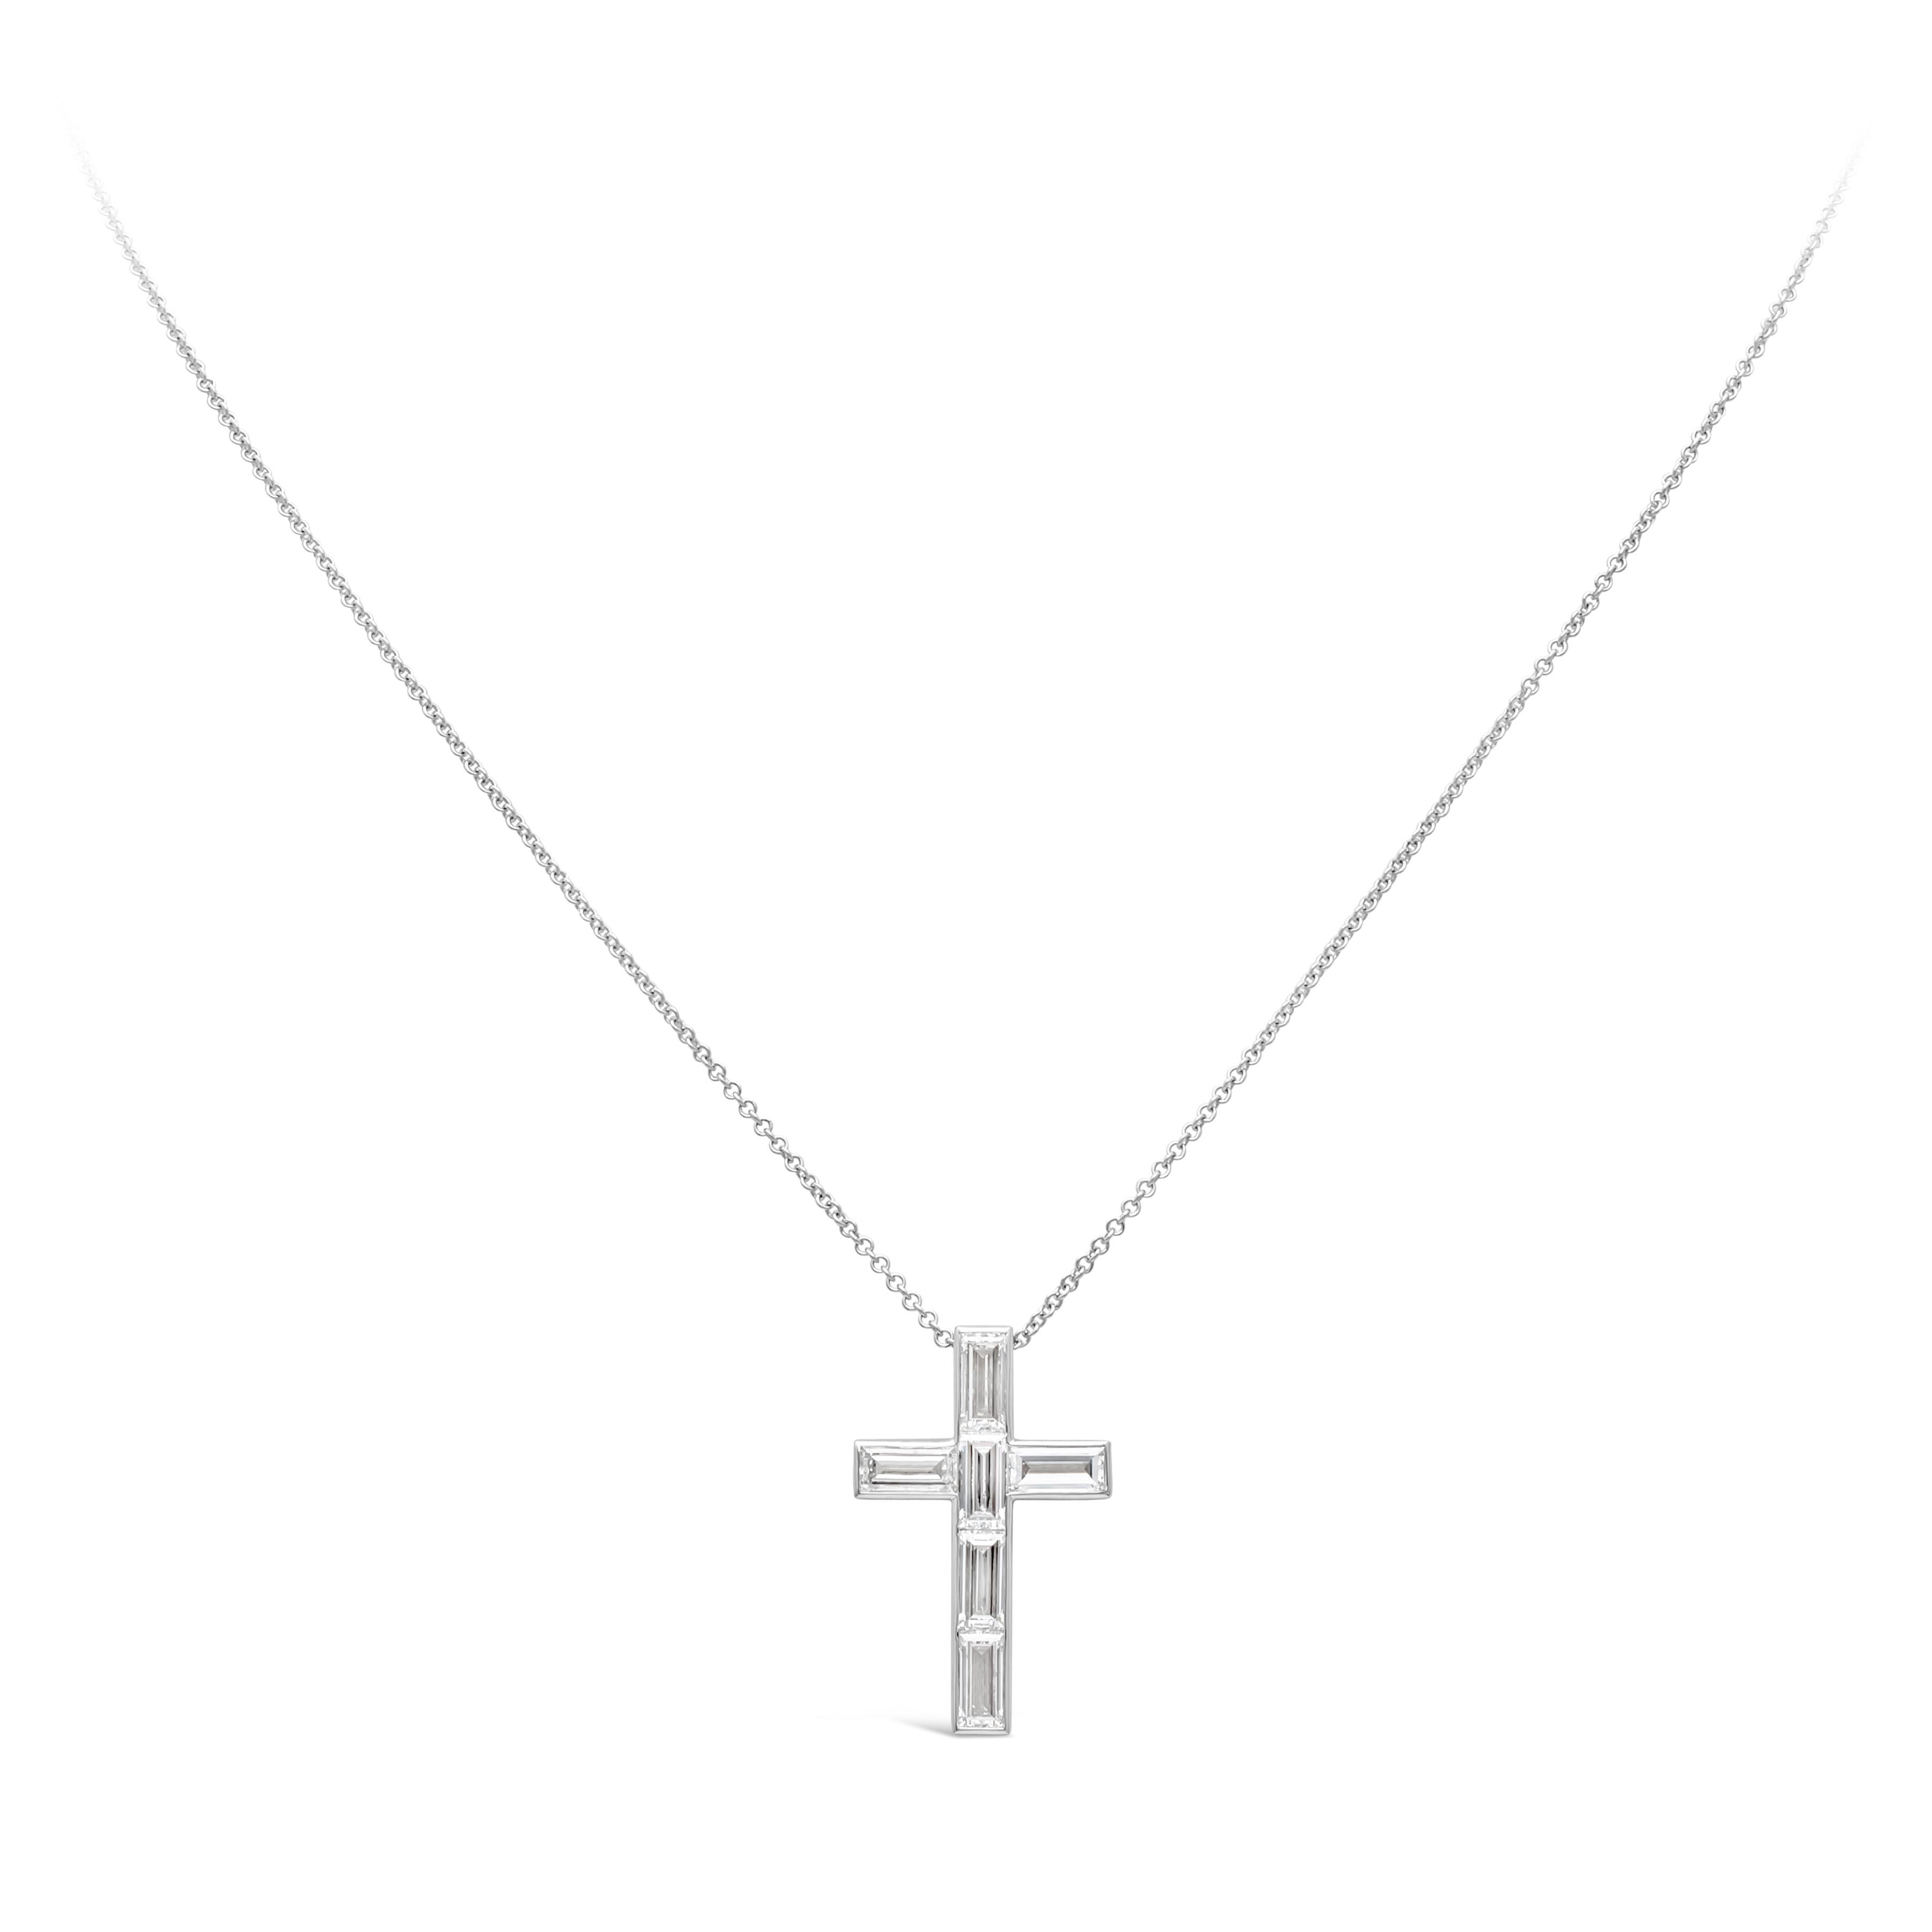 Showcasing a classic and simple religious cross pendant necklace set with baguette cut diamonds in a bezel set design weighing 1.76 carats total, G color and VS+ in clarity. Suspended on an adjustable 18inches white gold chain. Finely made in 18k